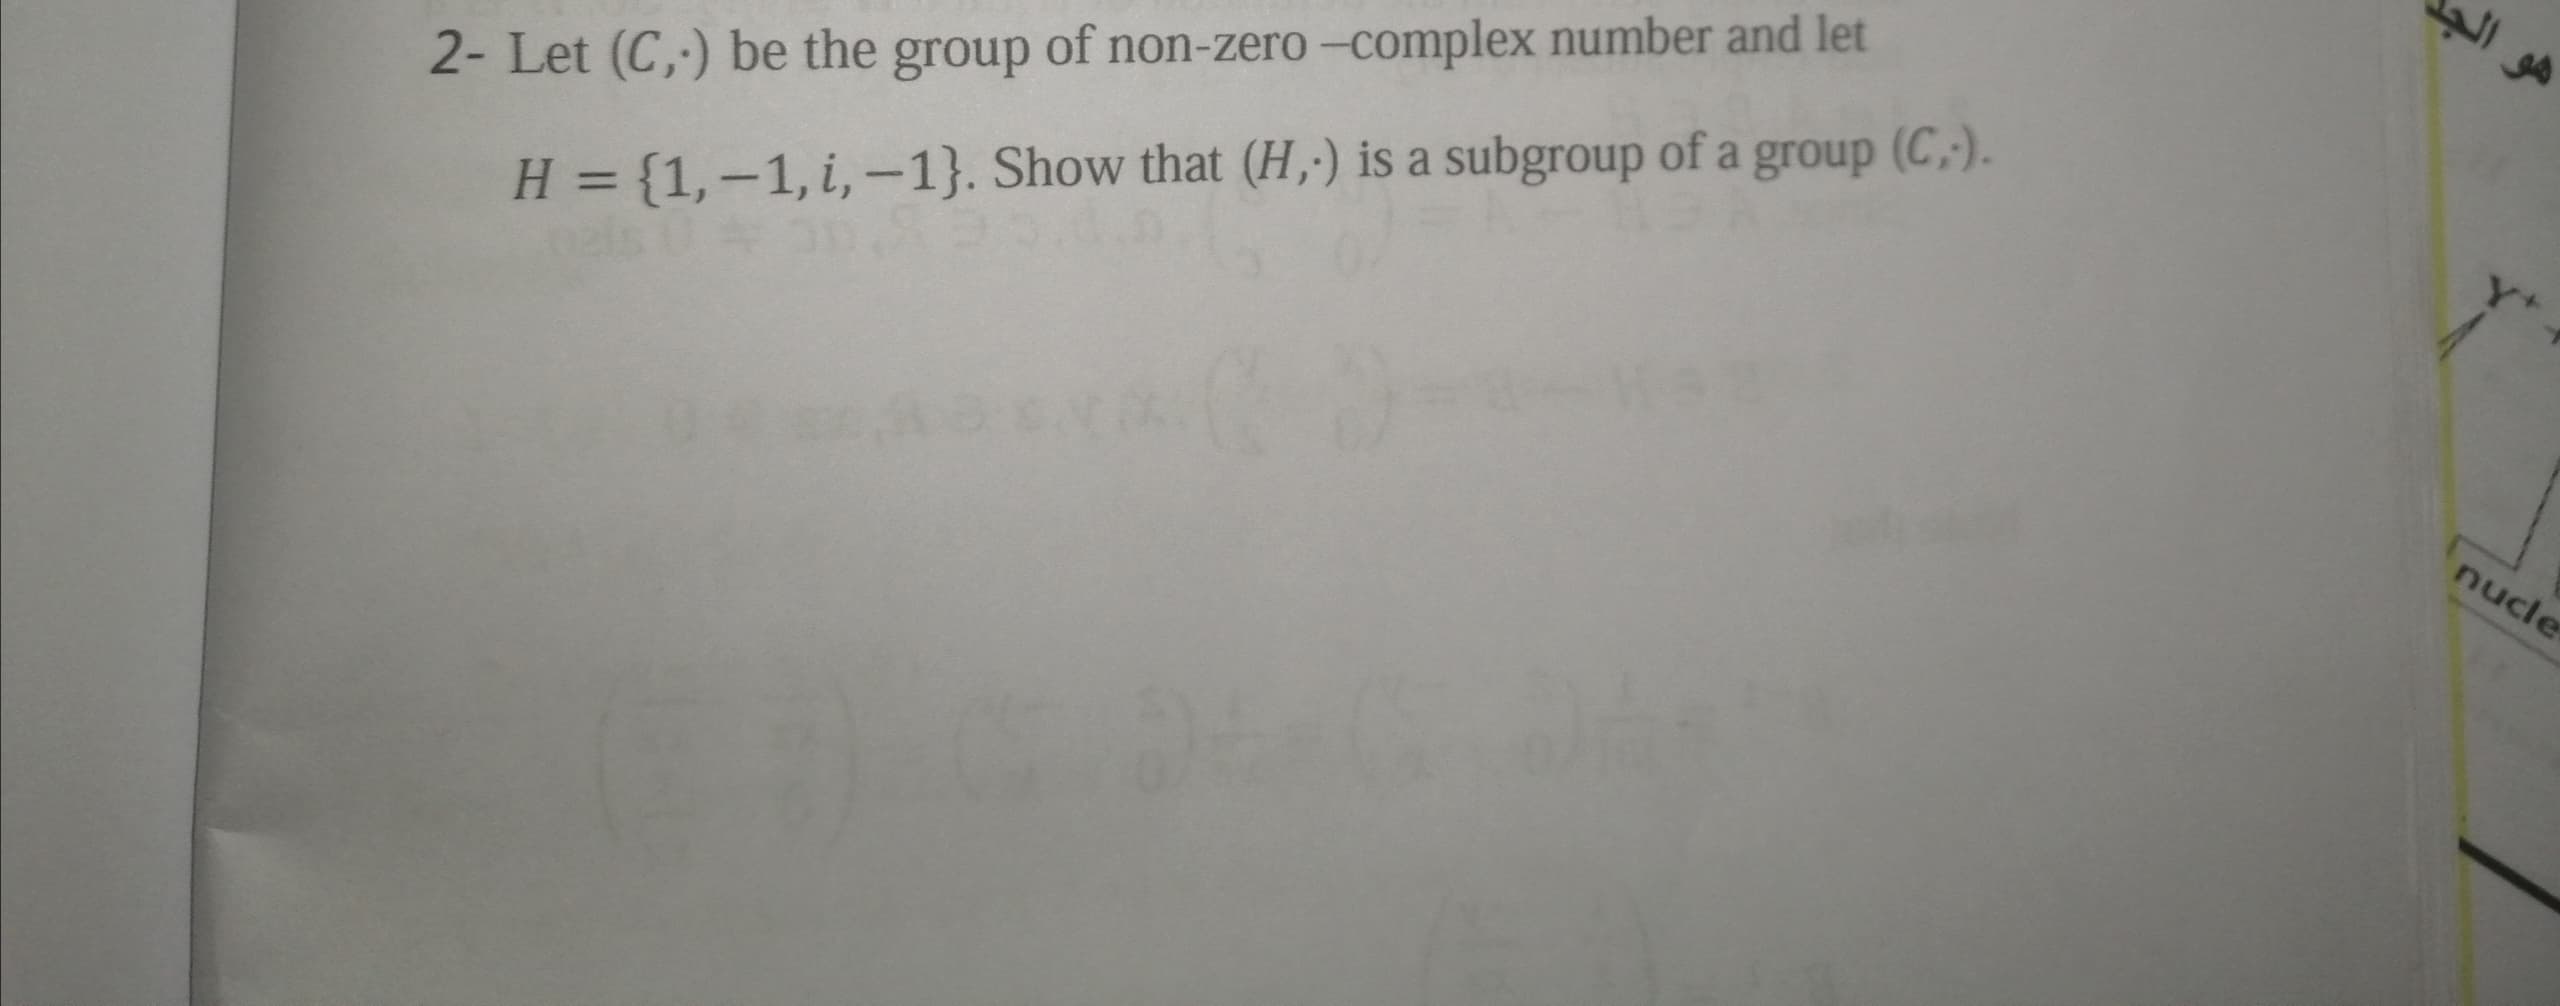 2- Let (C,) be the group of non-zero -complex number and let
H = {1,-1, i, -1}. Show that (H,;) is a subgroup of a group (C,).
%3D
